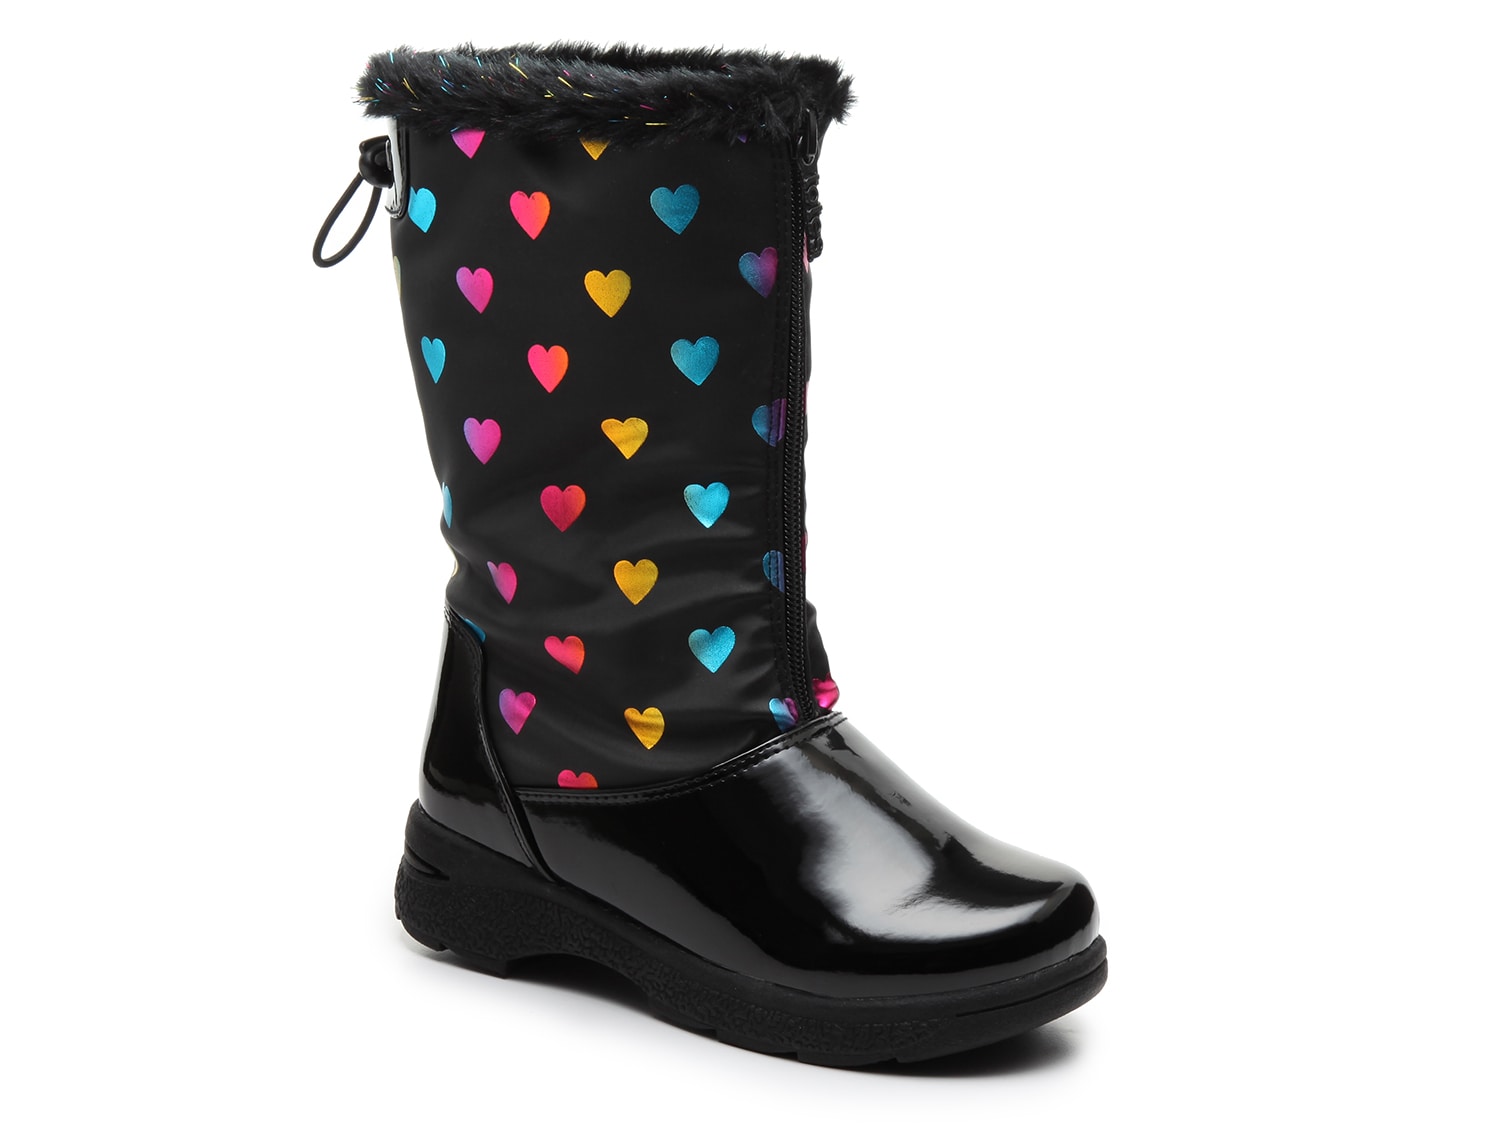 totes sunset snow boot